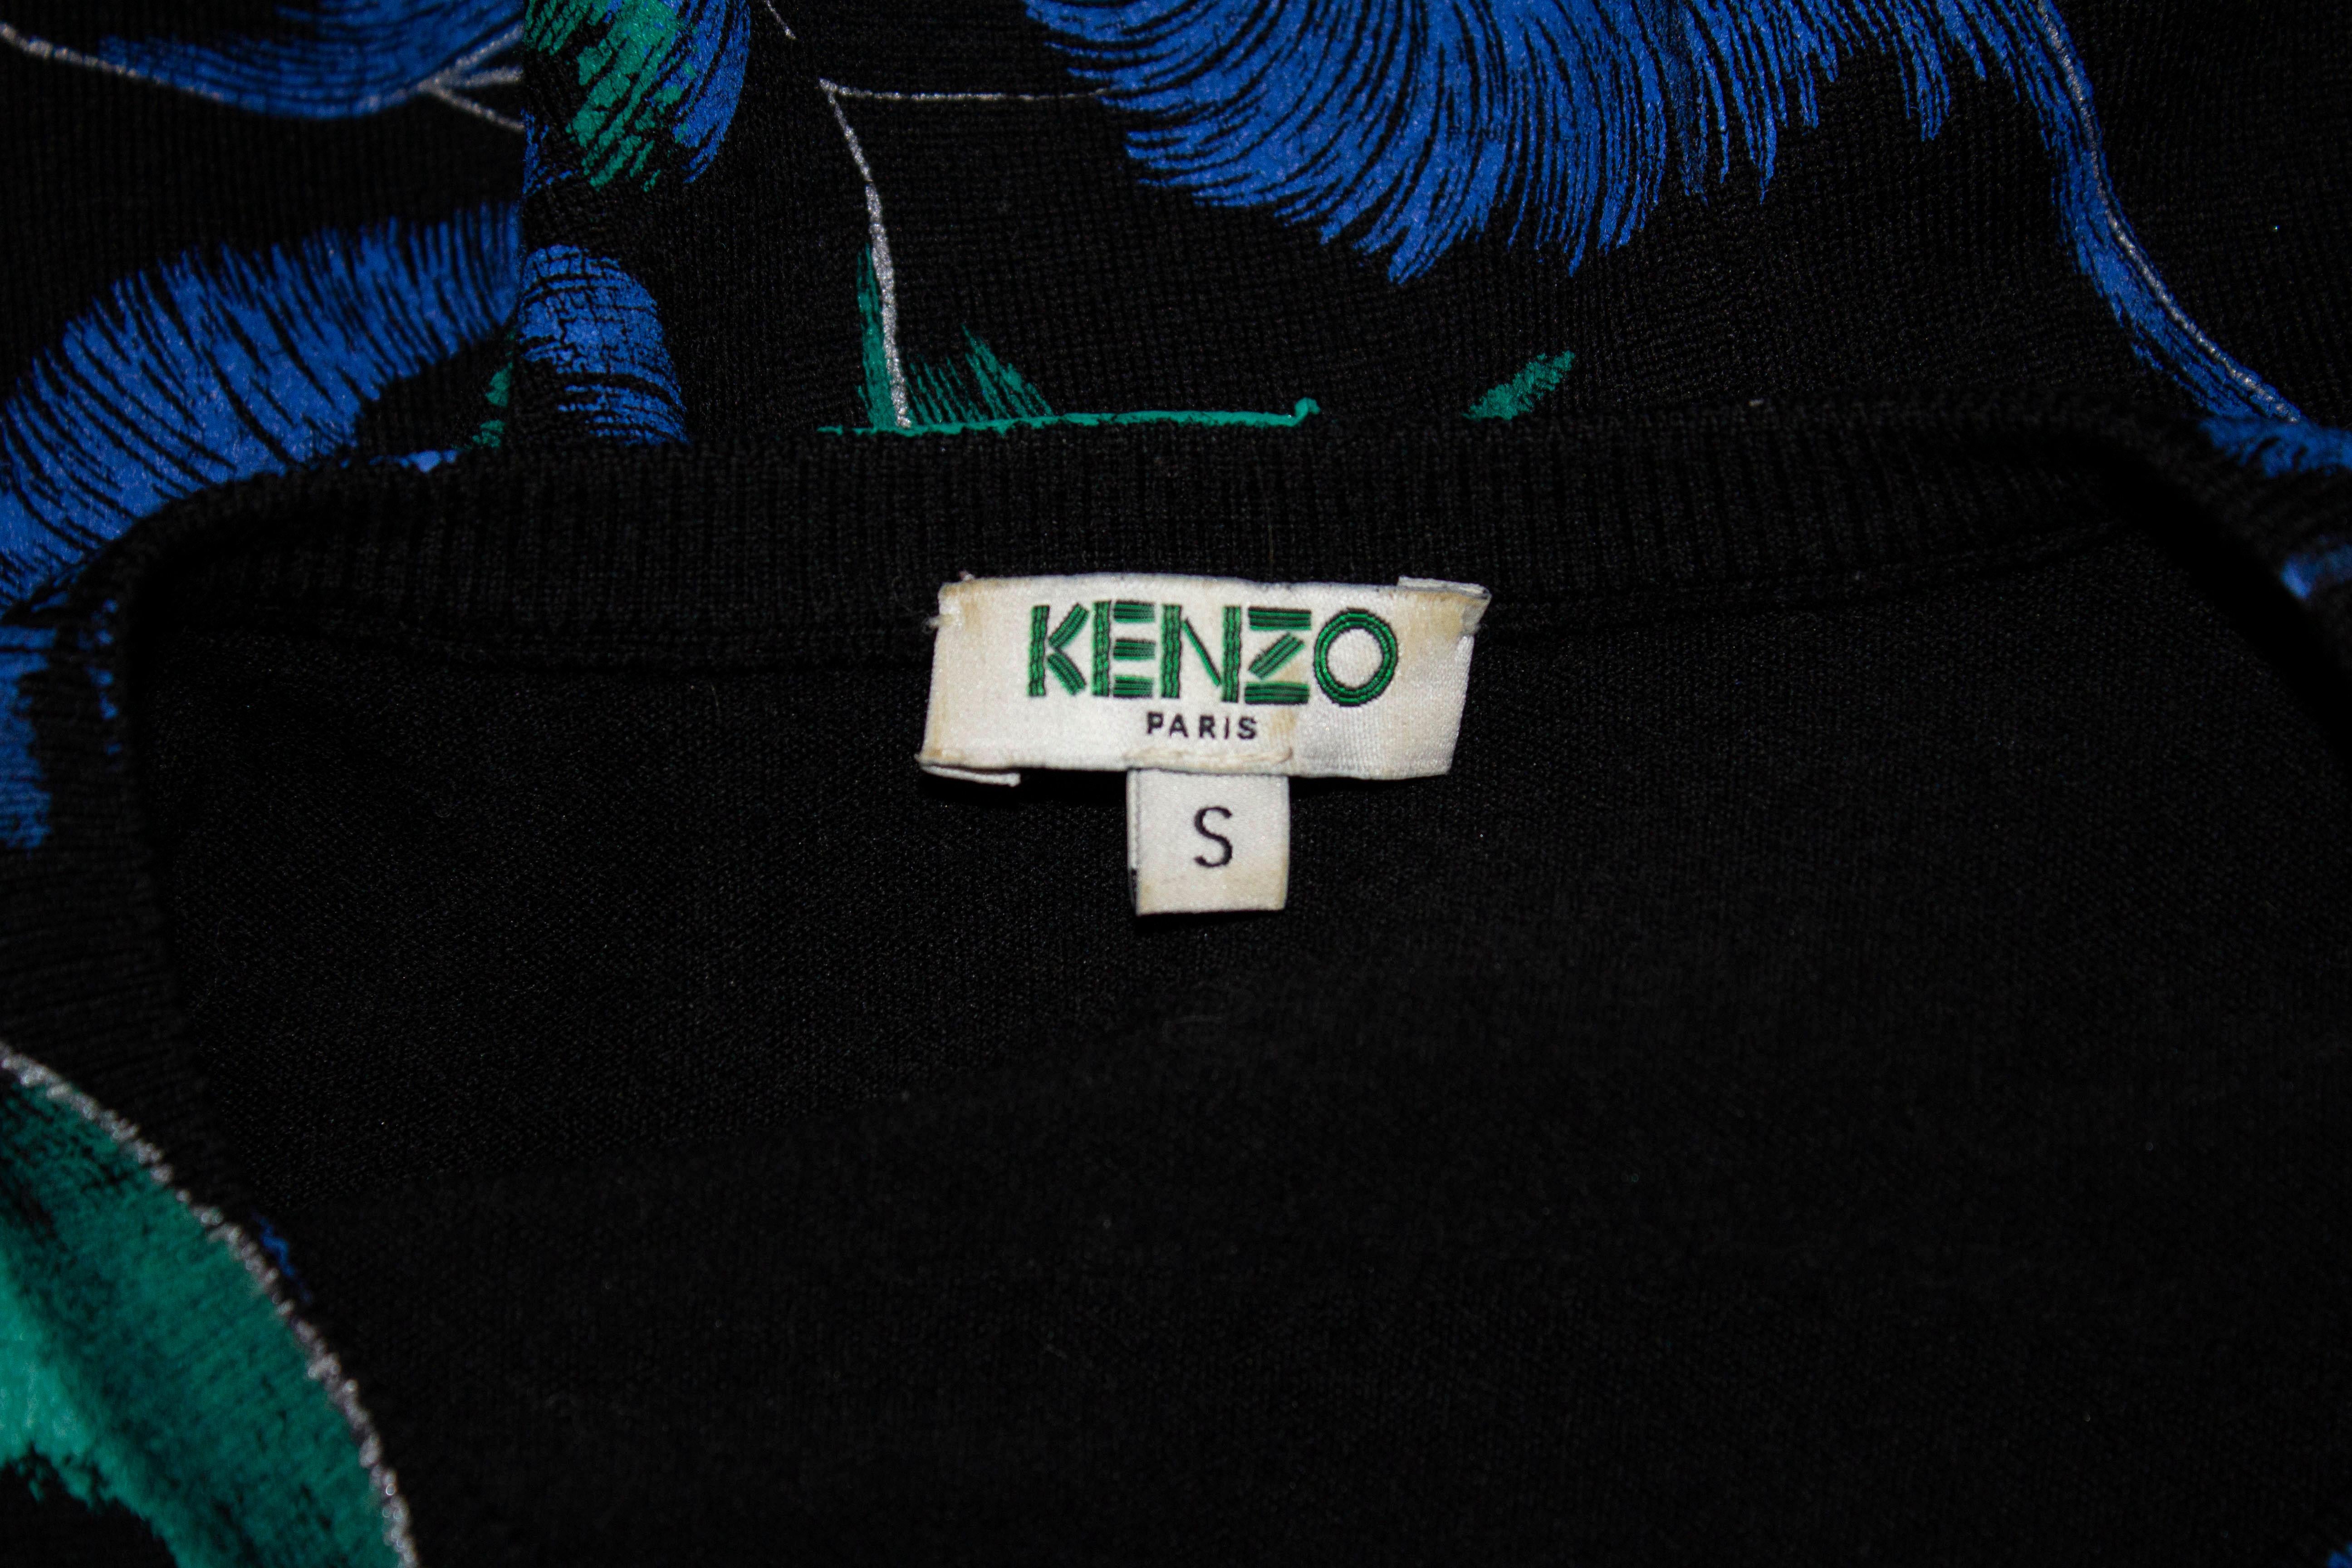 A fun dress for Spring /Summer by Kenzo Paris.  This knitted dress, in a wool mix has a black background with a blue and green print . It has short sleaves and a flared skirt. 
Measurements: Bust 34'', length 35''